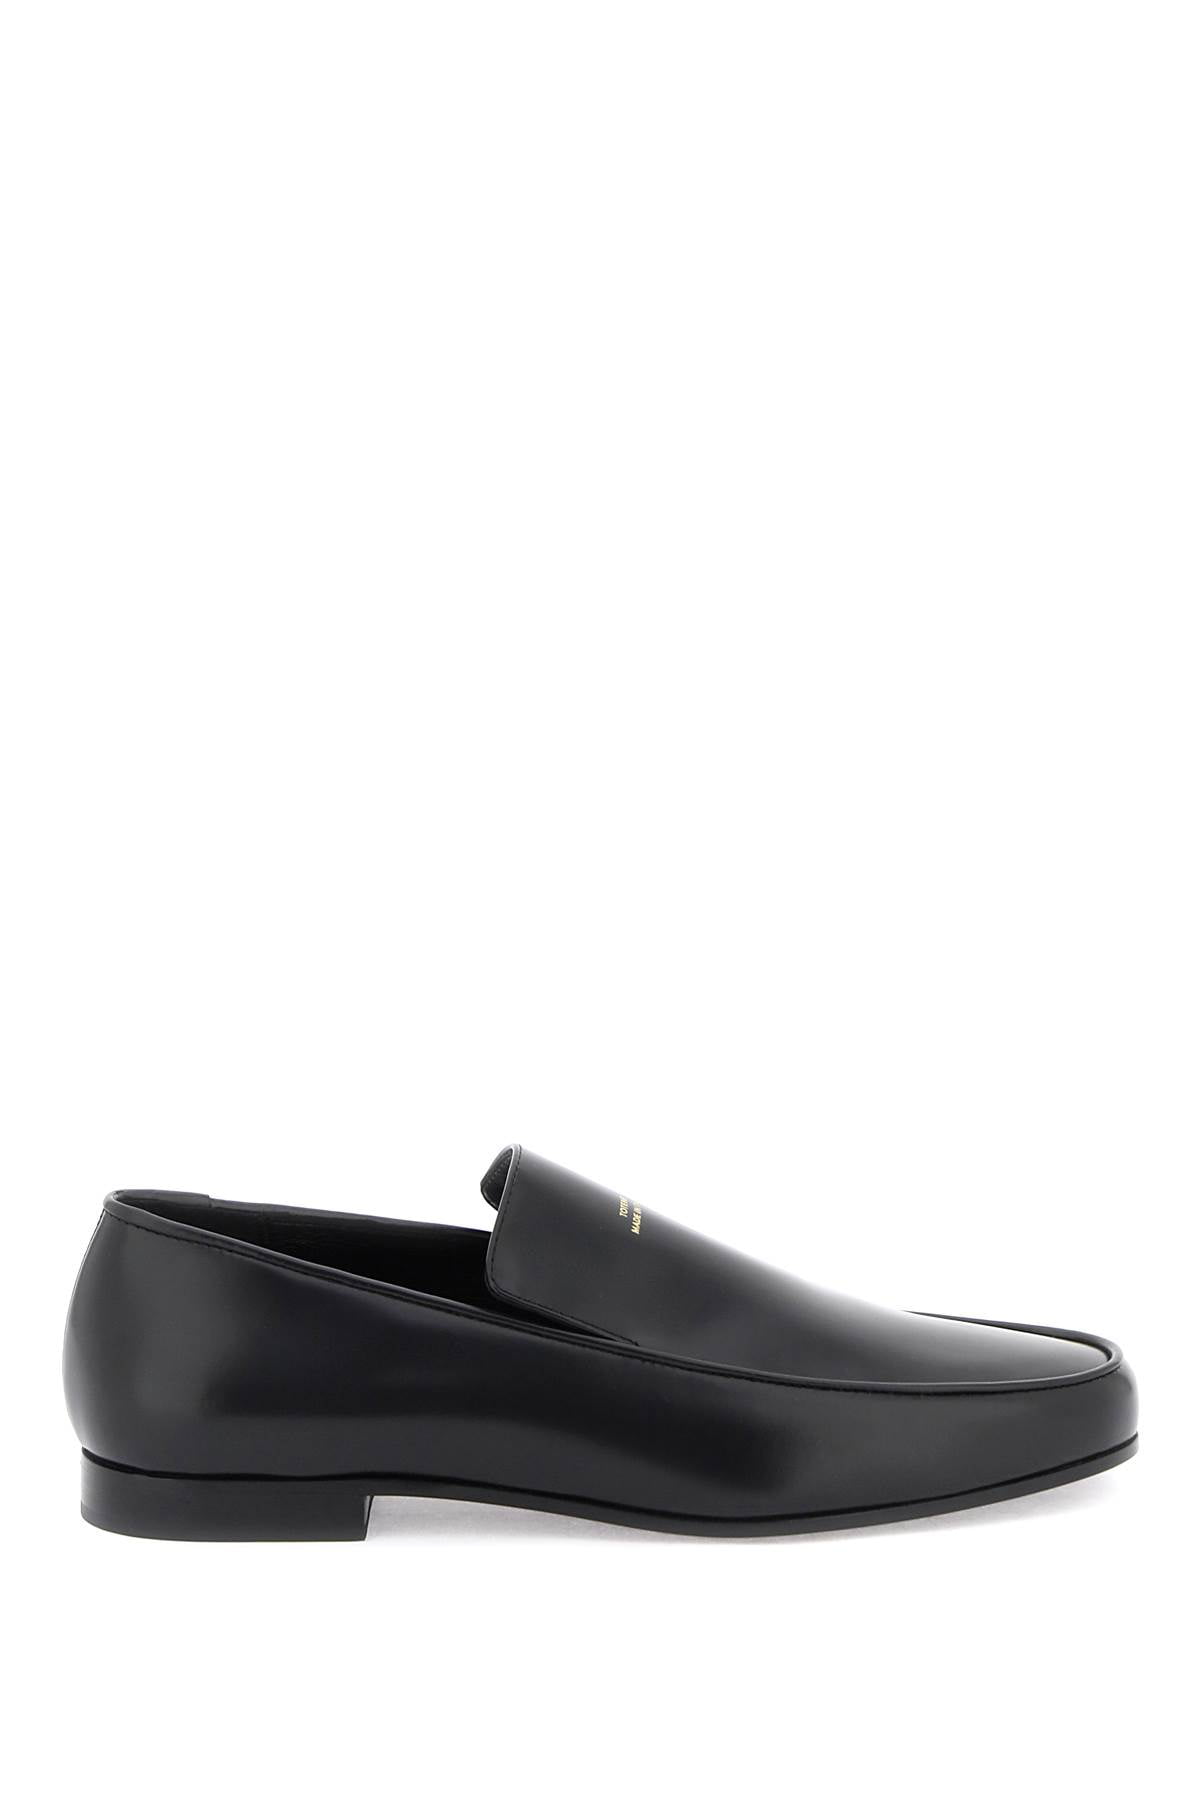 Toteme The Oval Loafers Women - Walmart.com